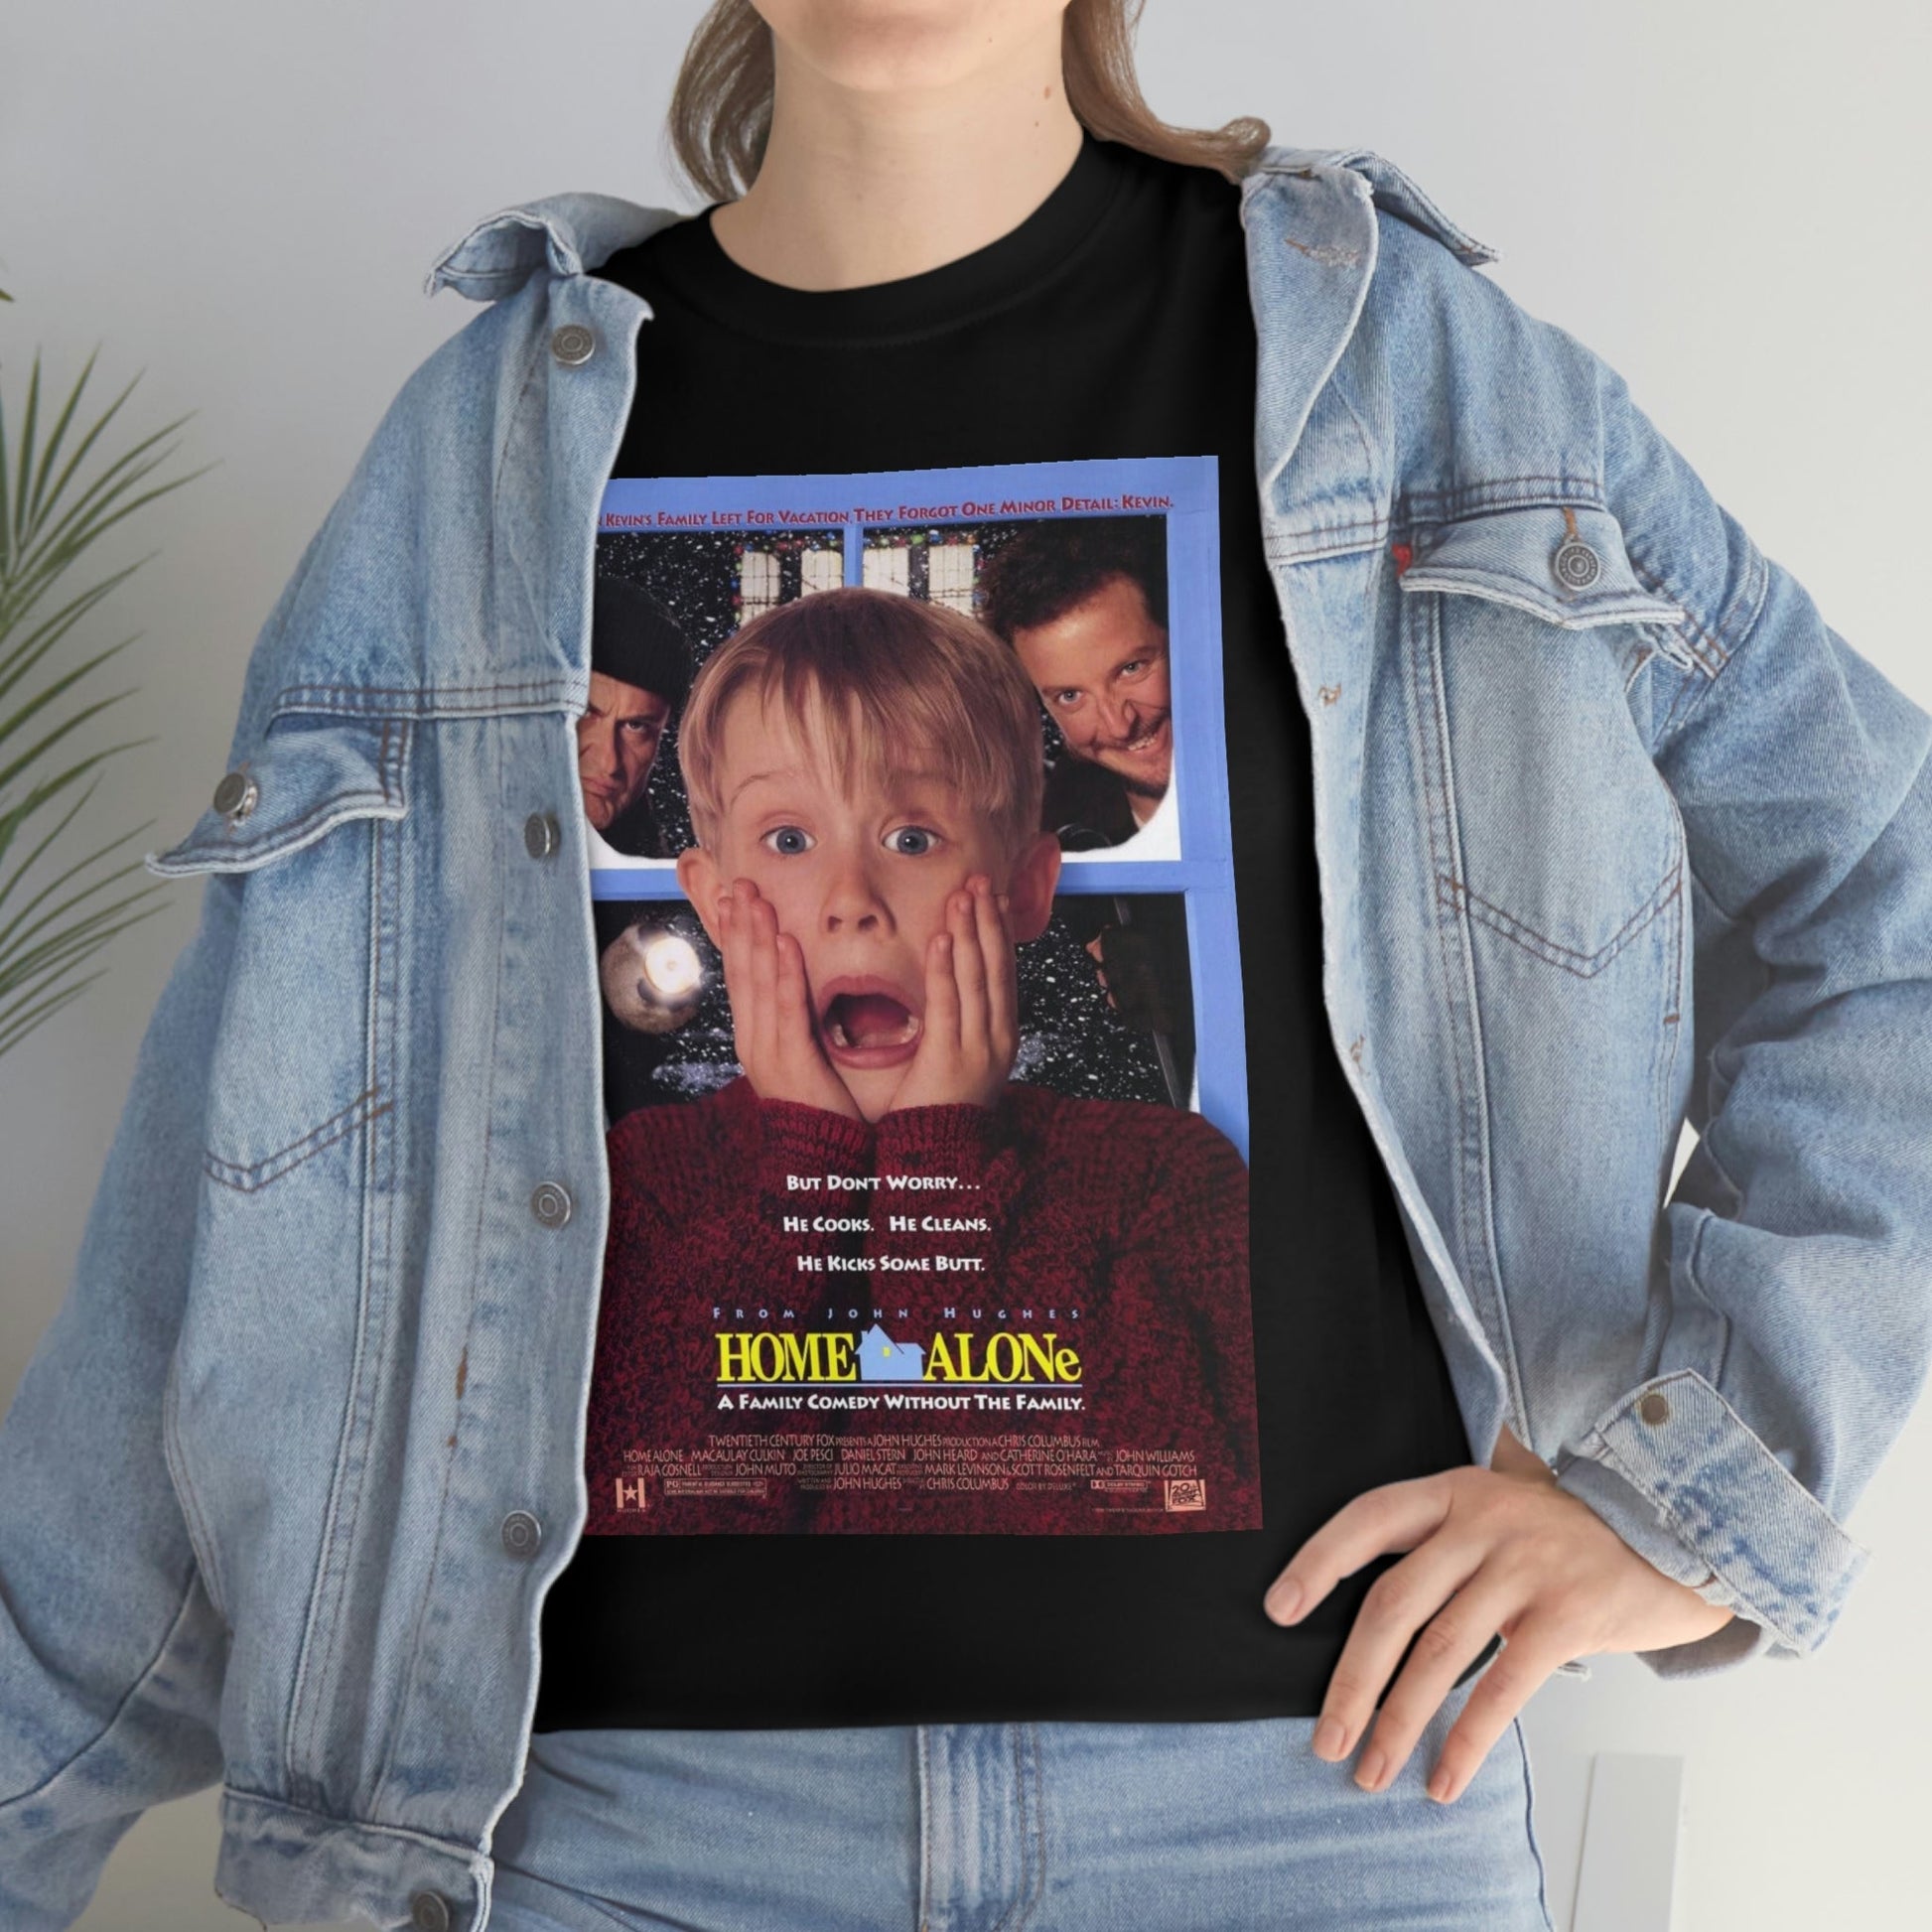 Home Alone Movie Poster T-Shirt - RetroTeeShop